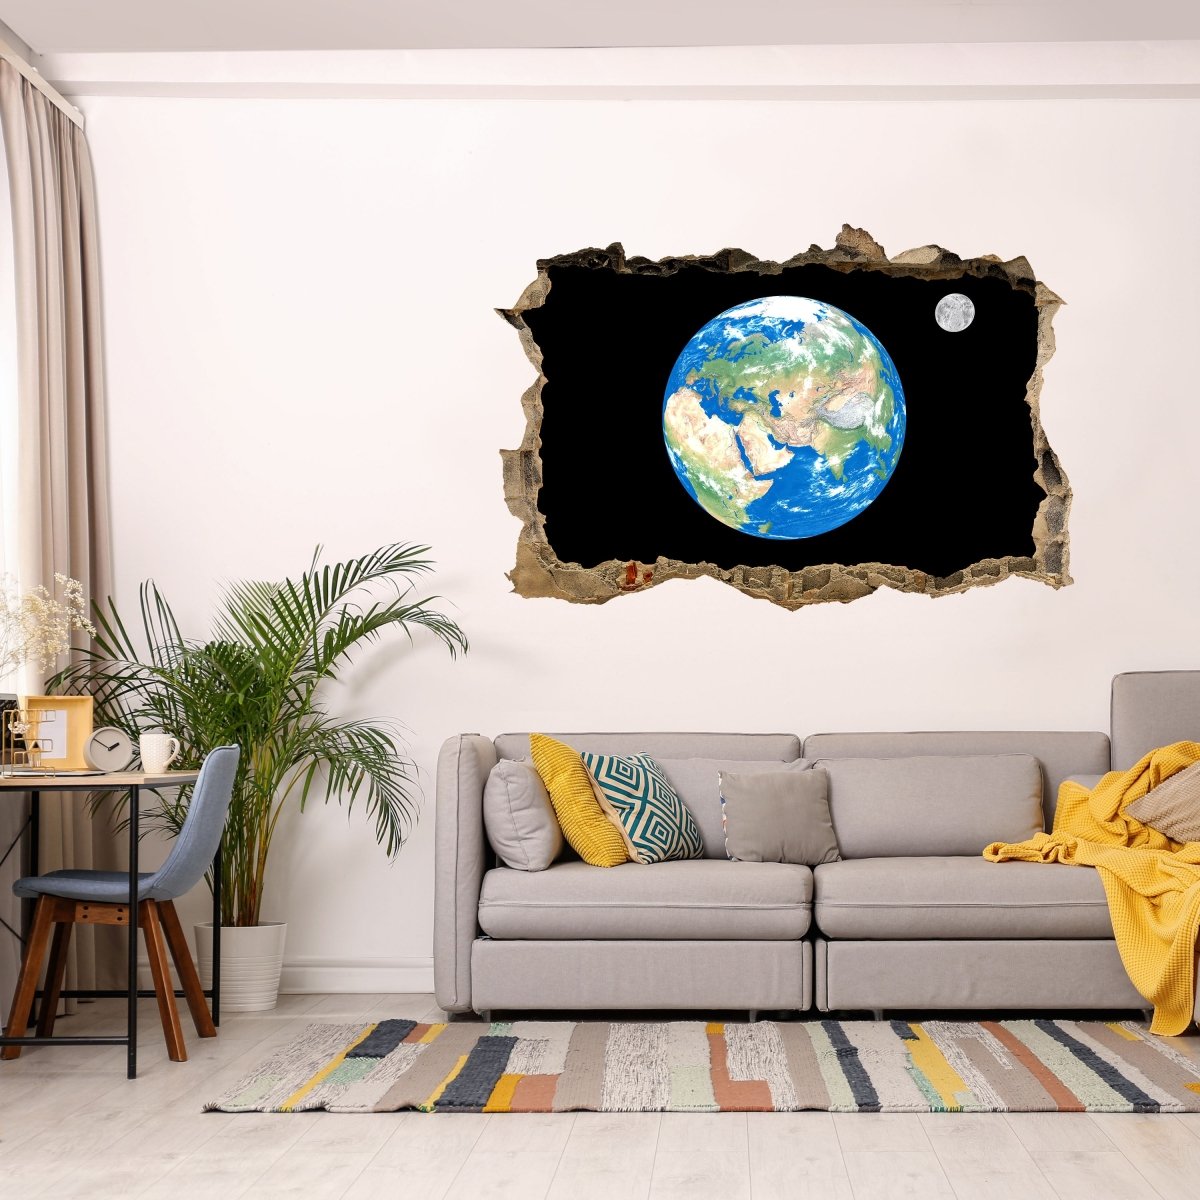 3D wall sticker earth with moon - Wall Decal M0402